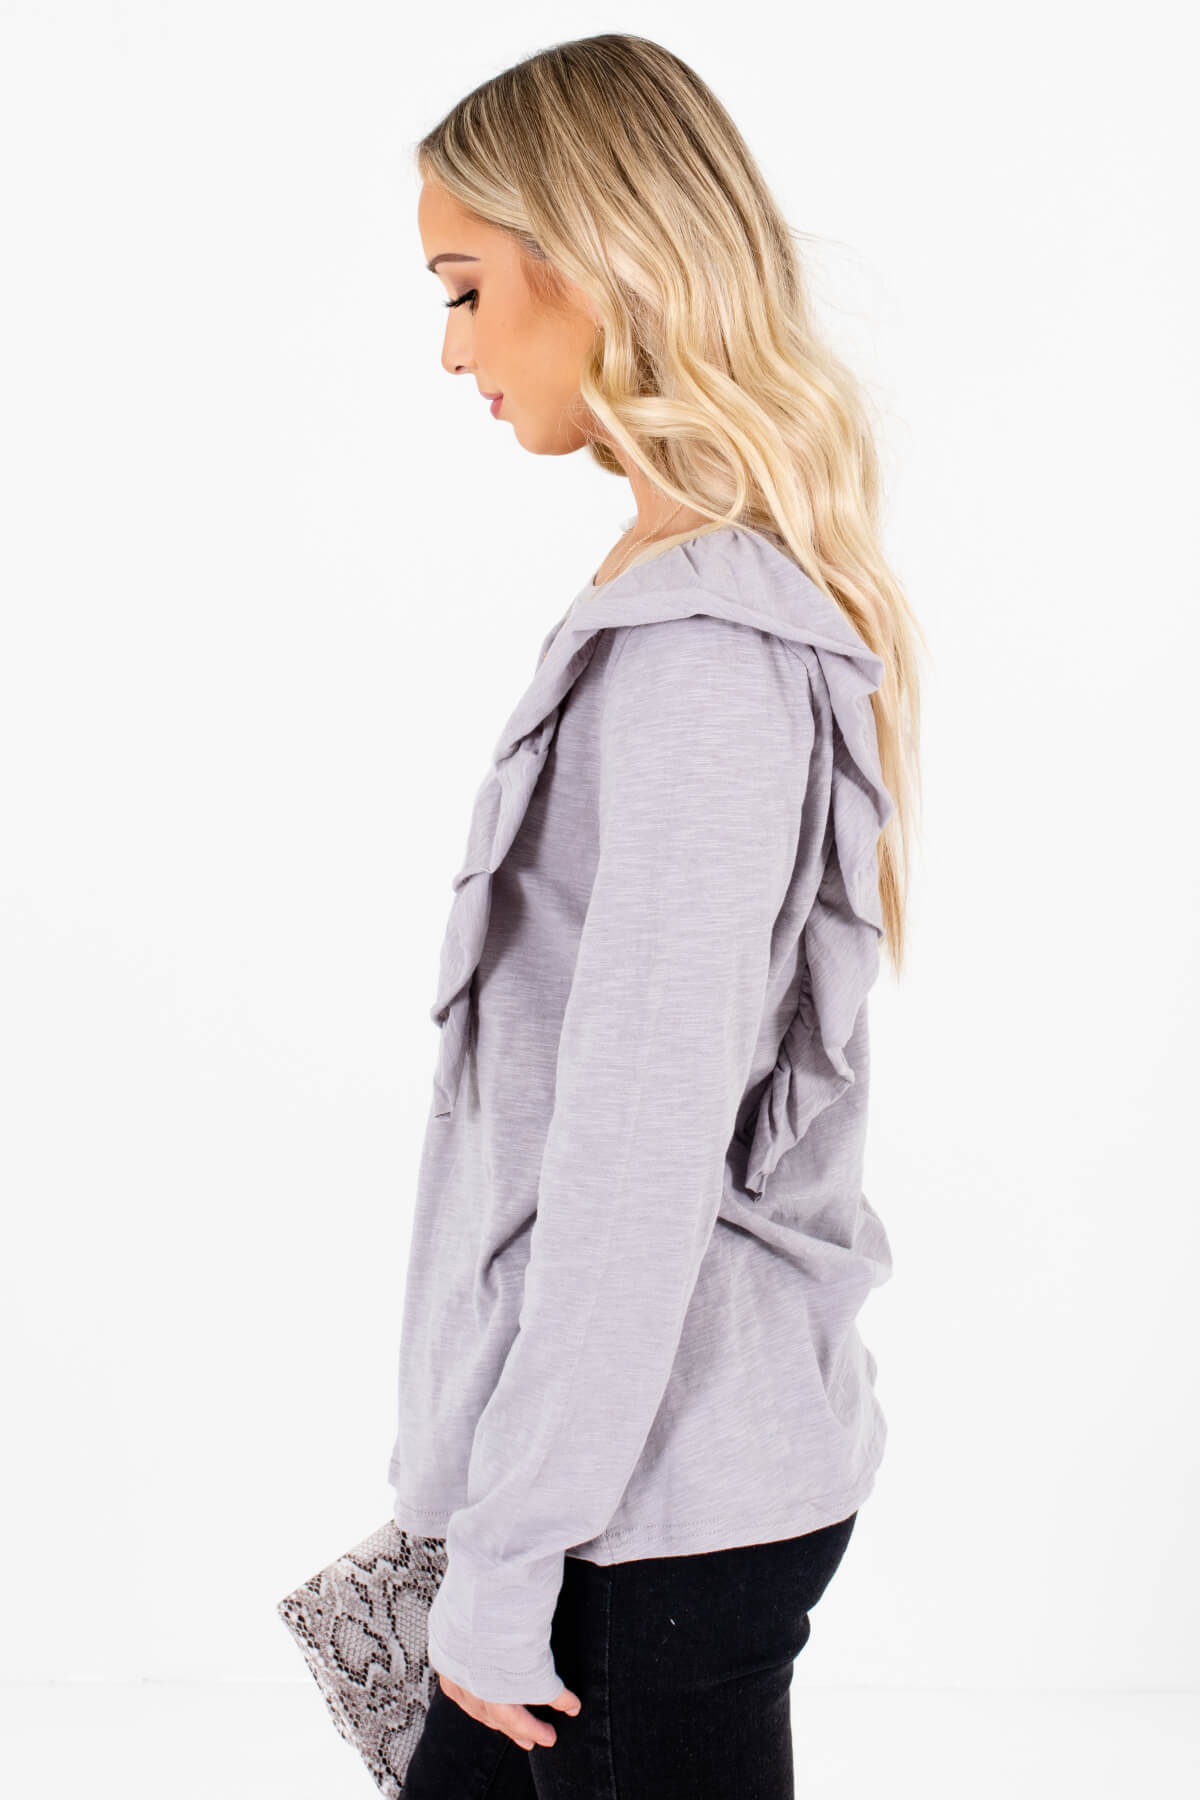 Light Slate Gray High-Quality Lightweight Material Boutique Tops